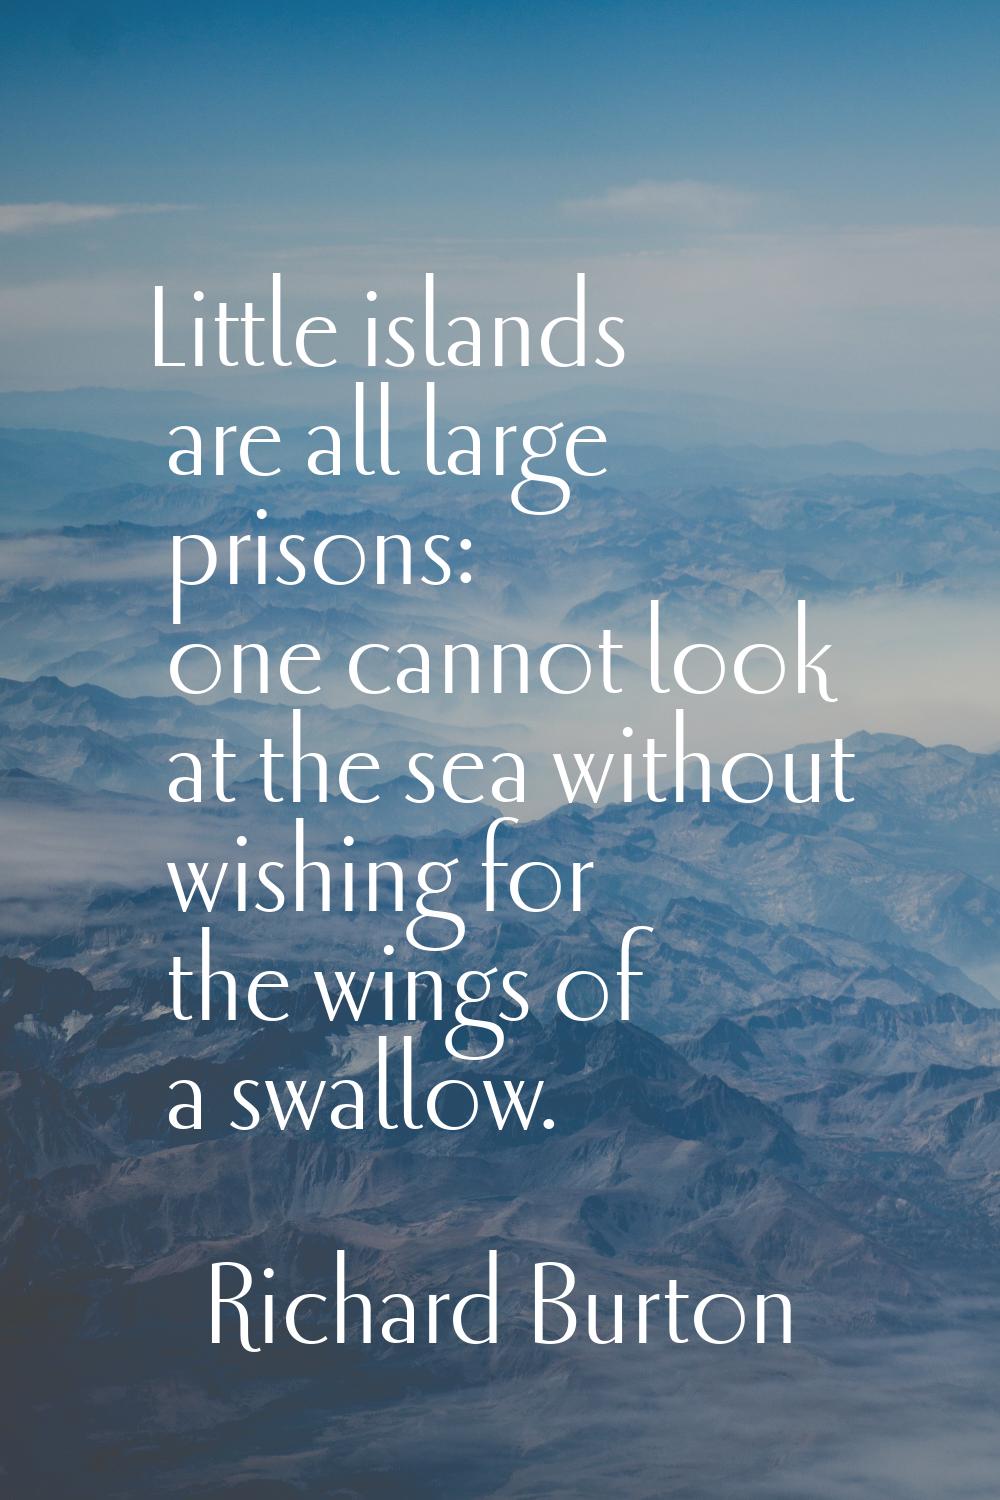 Little islands are all large prisons: one cannot look at the sea without wishing for the wings of a